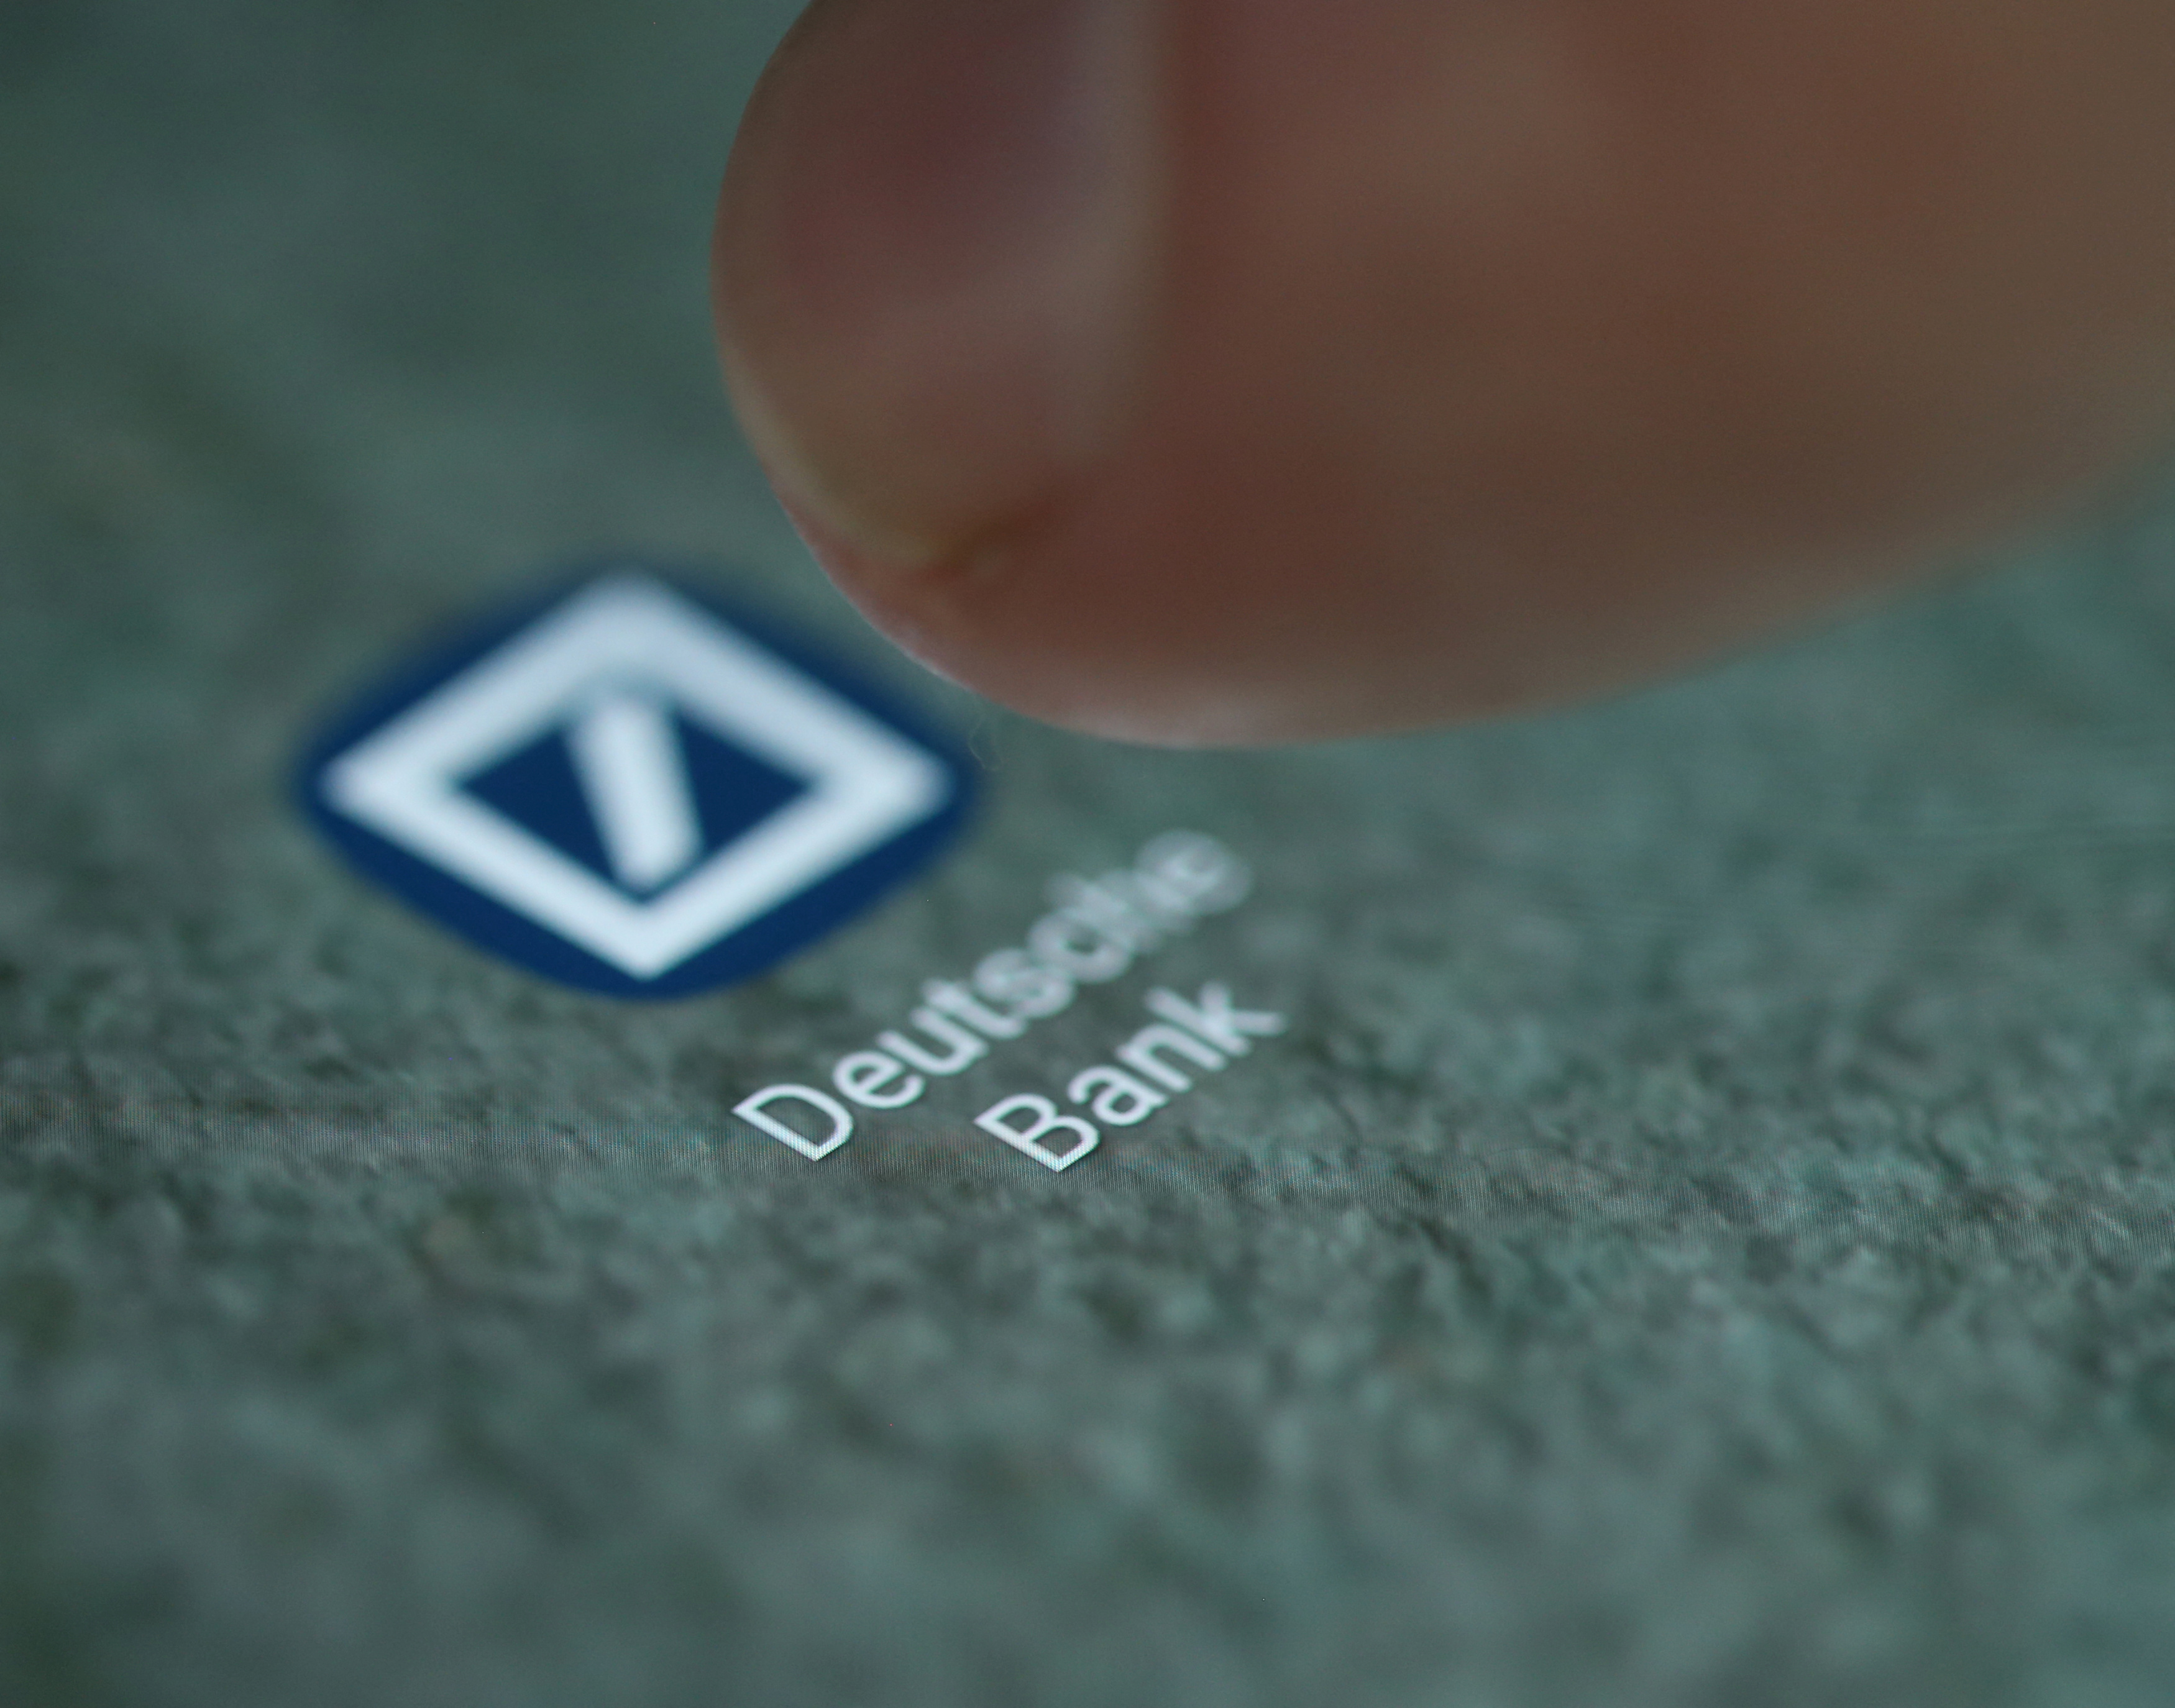 The Deutsche Bank app logo is seen on a smartphone in this illustration